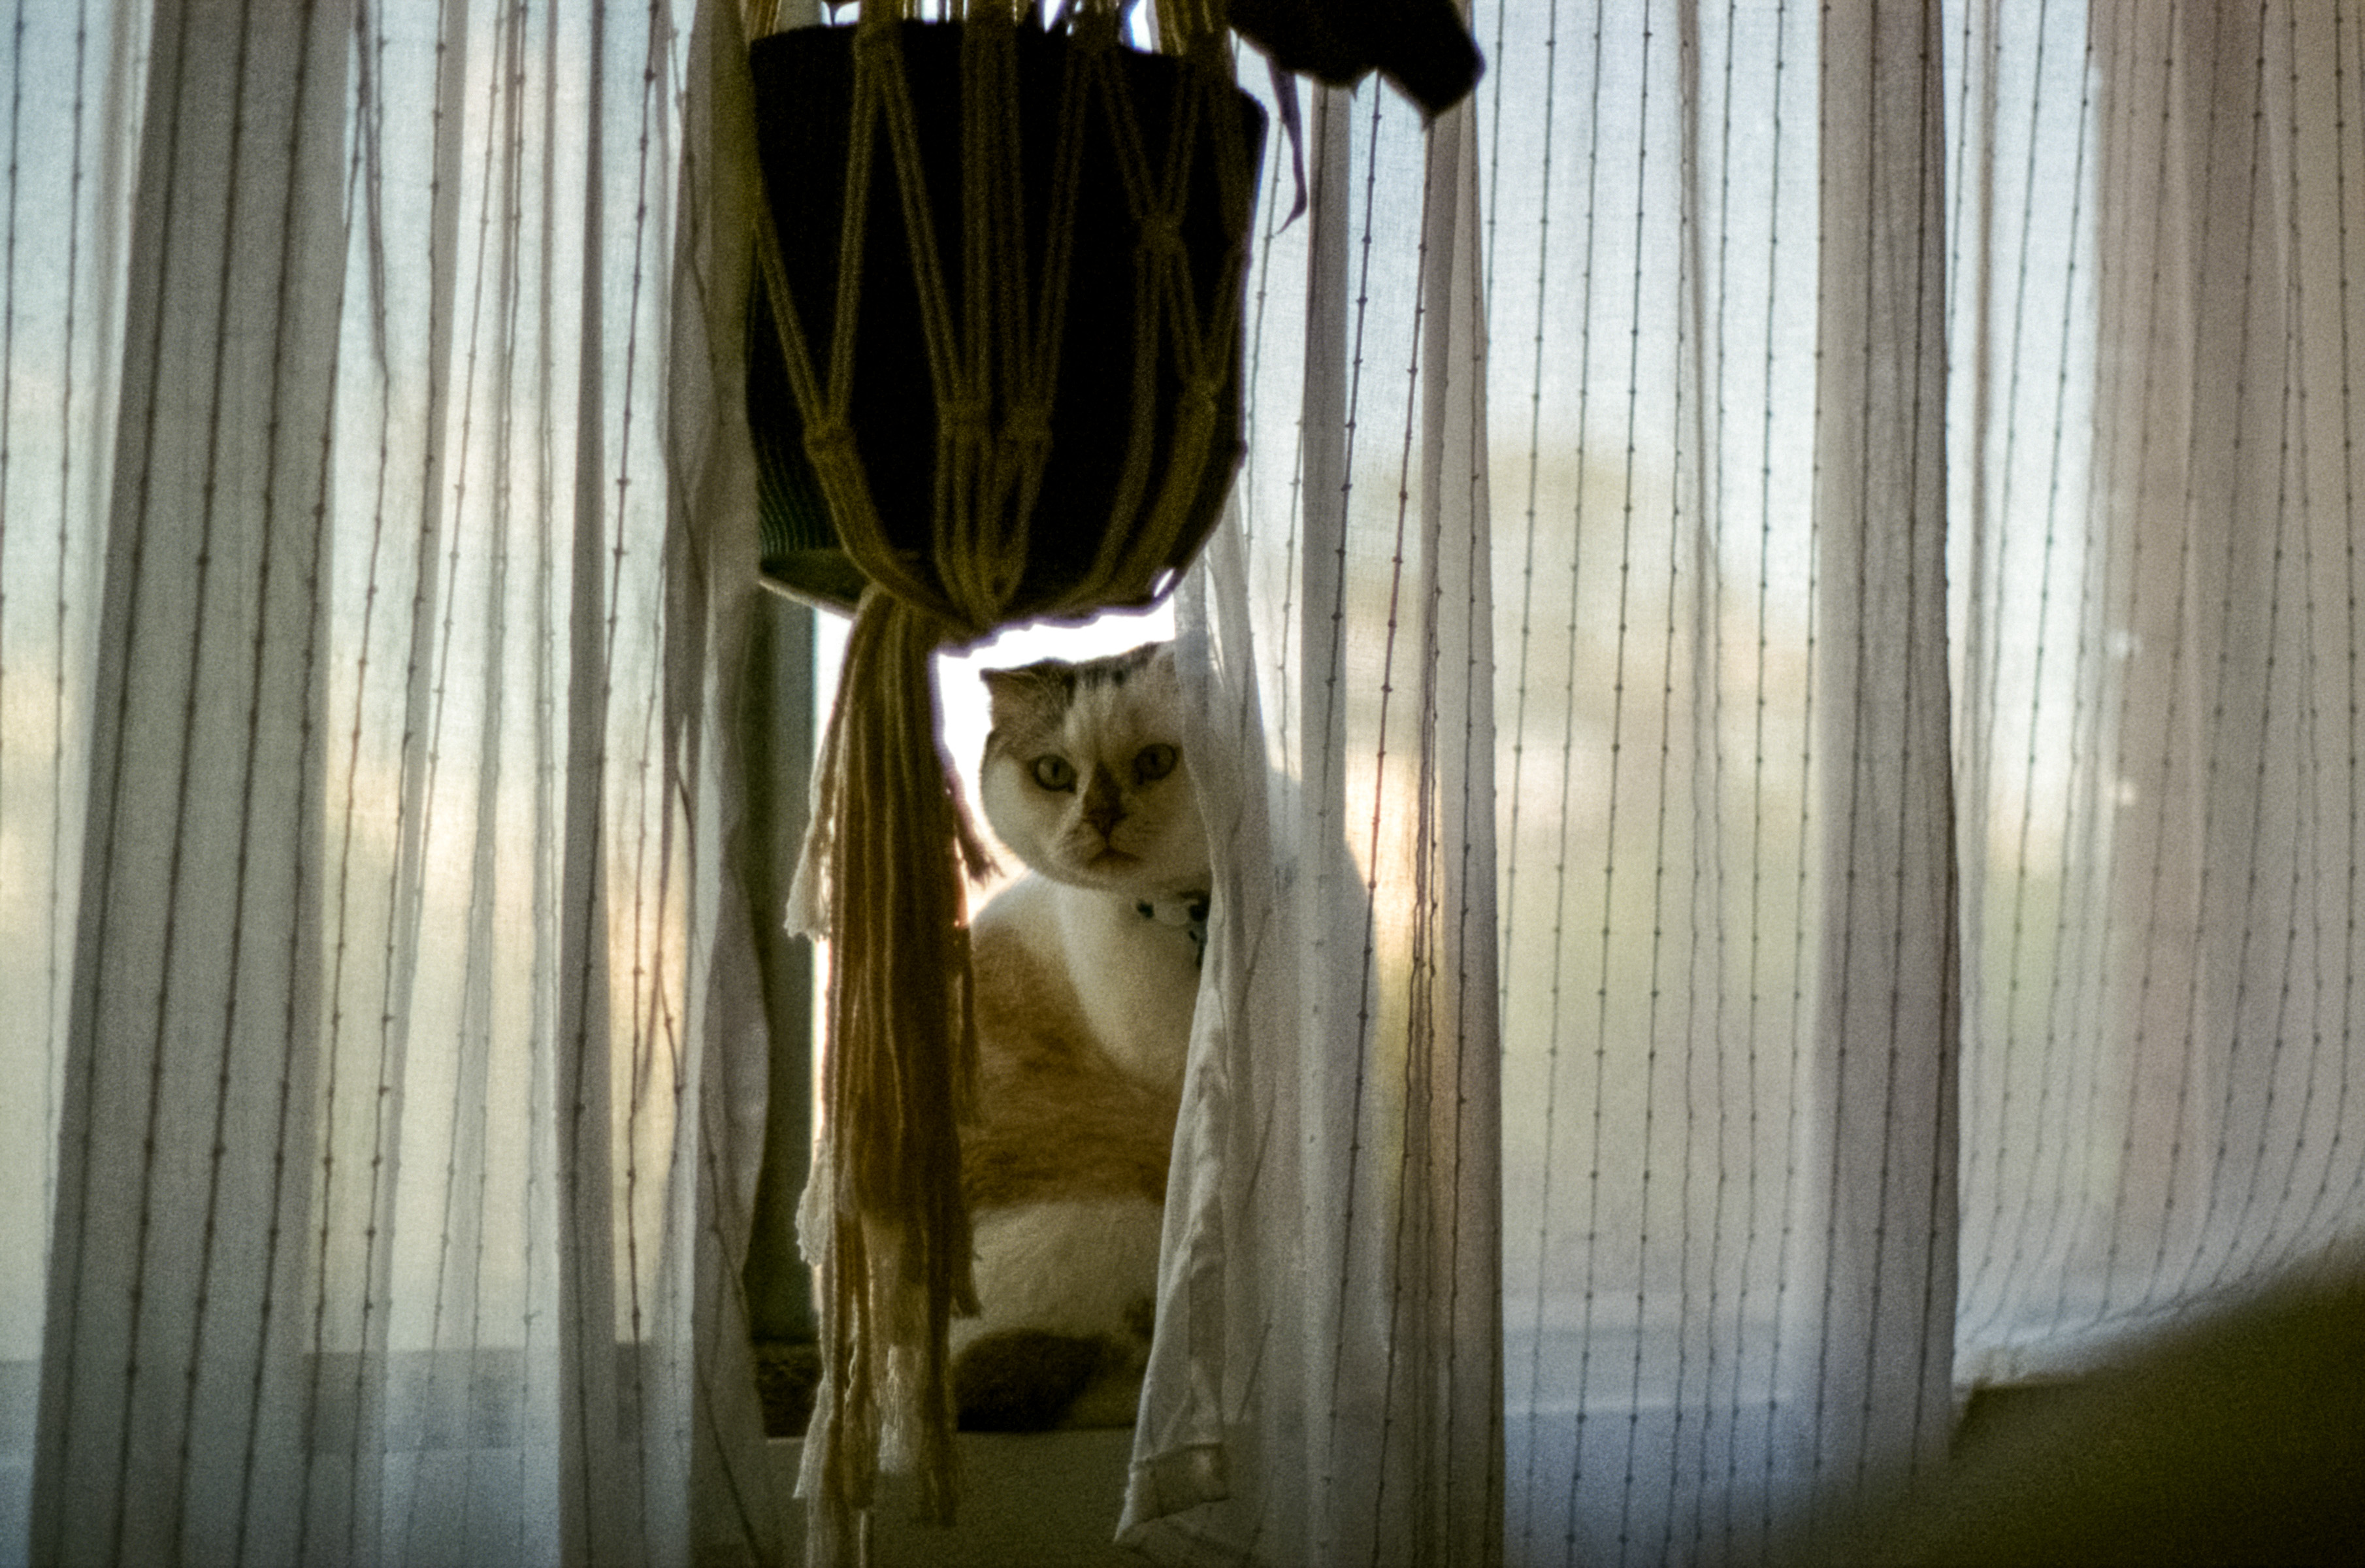 Brown and white cat sitting on a windowsill peers nervously around the edge of some curtains, looking into the camera.